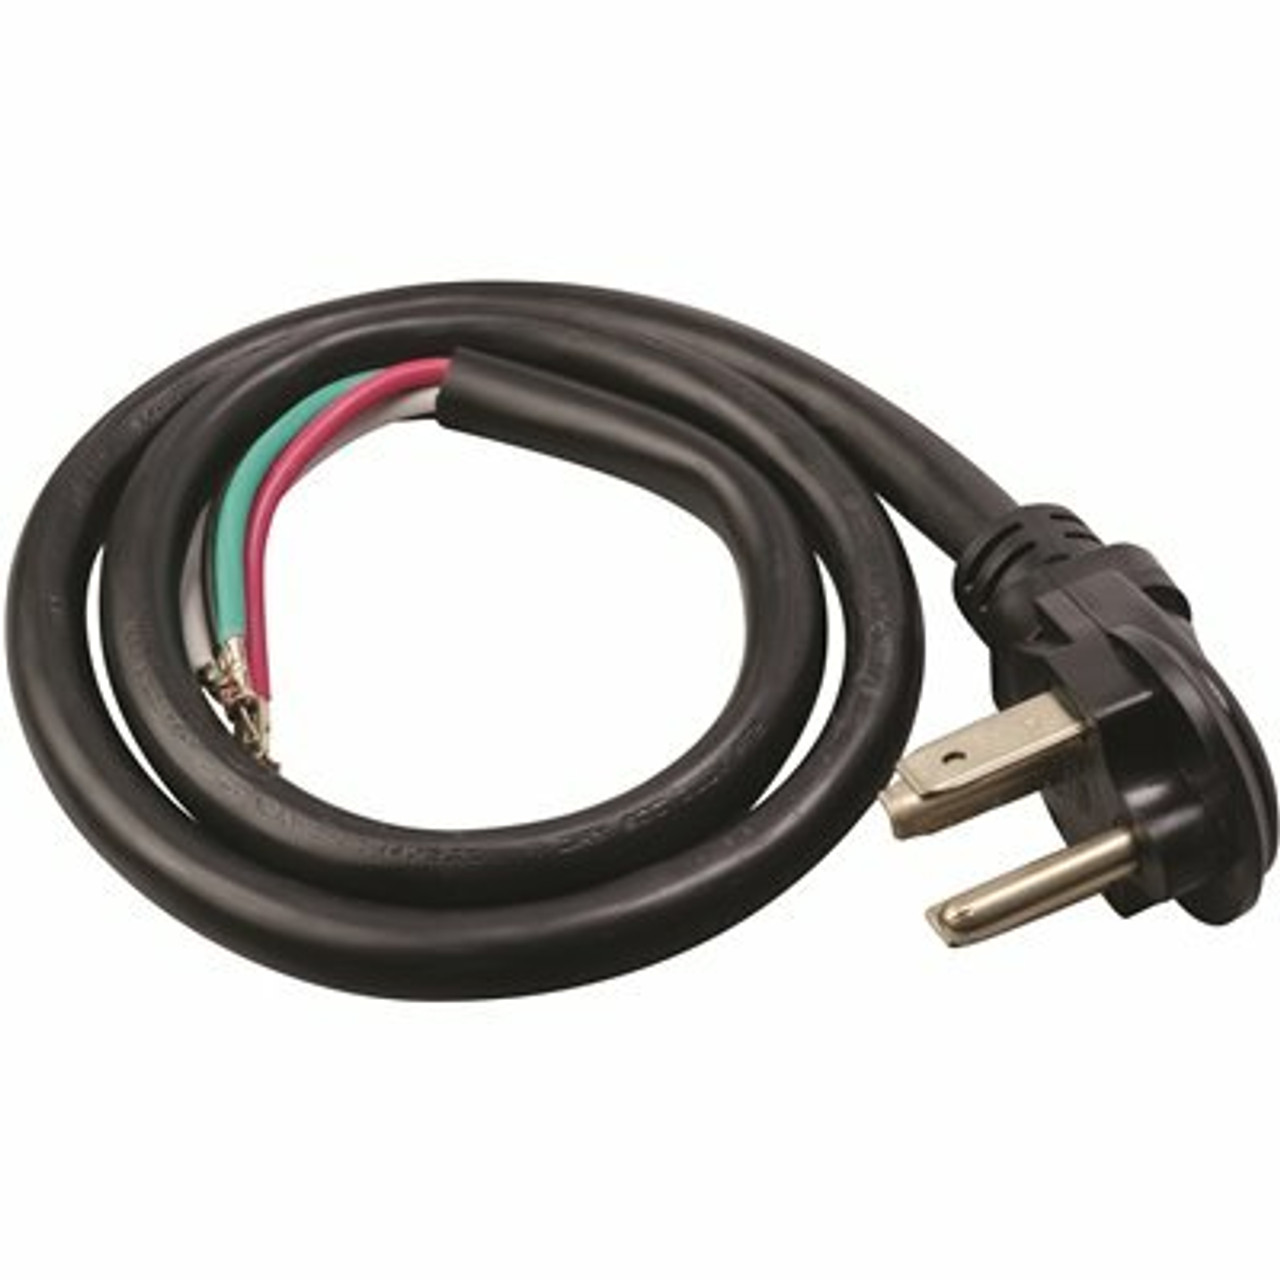 KIT ORDERS ONLY - NOT FOR INDIVIDUAL SALE - Southwire 4 ft. 10/4 Round Dryer Cord in Black